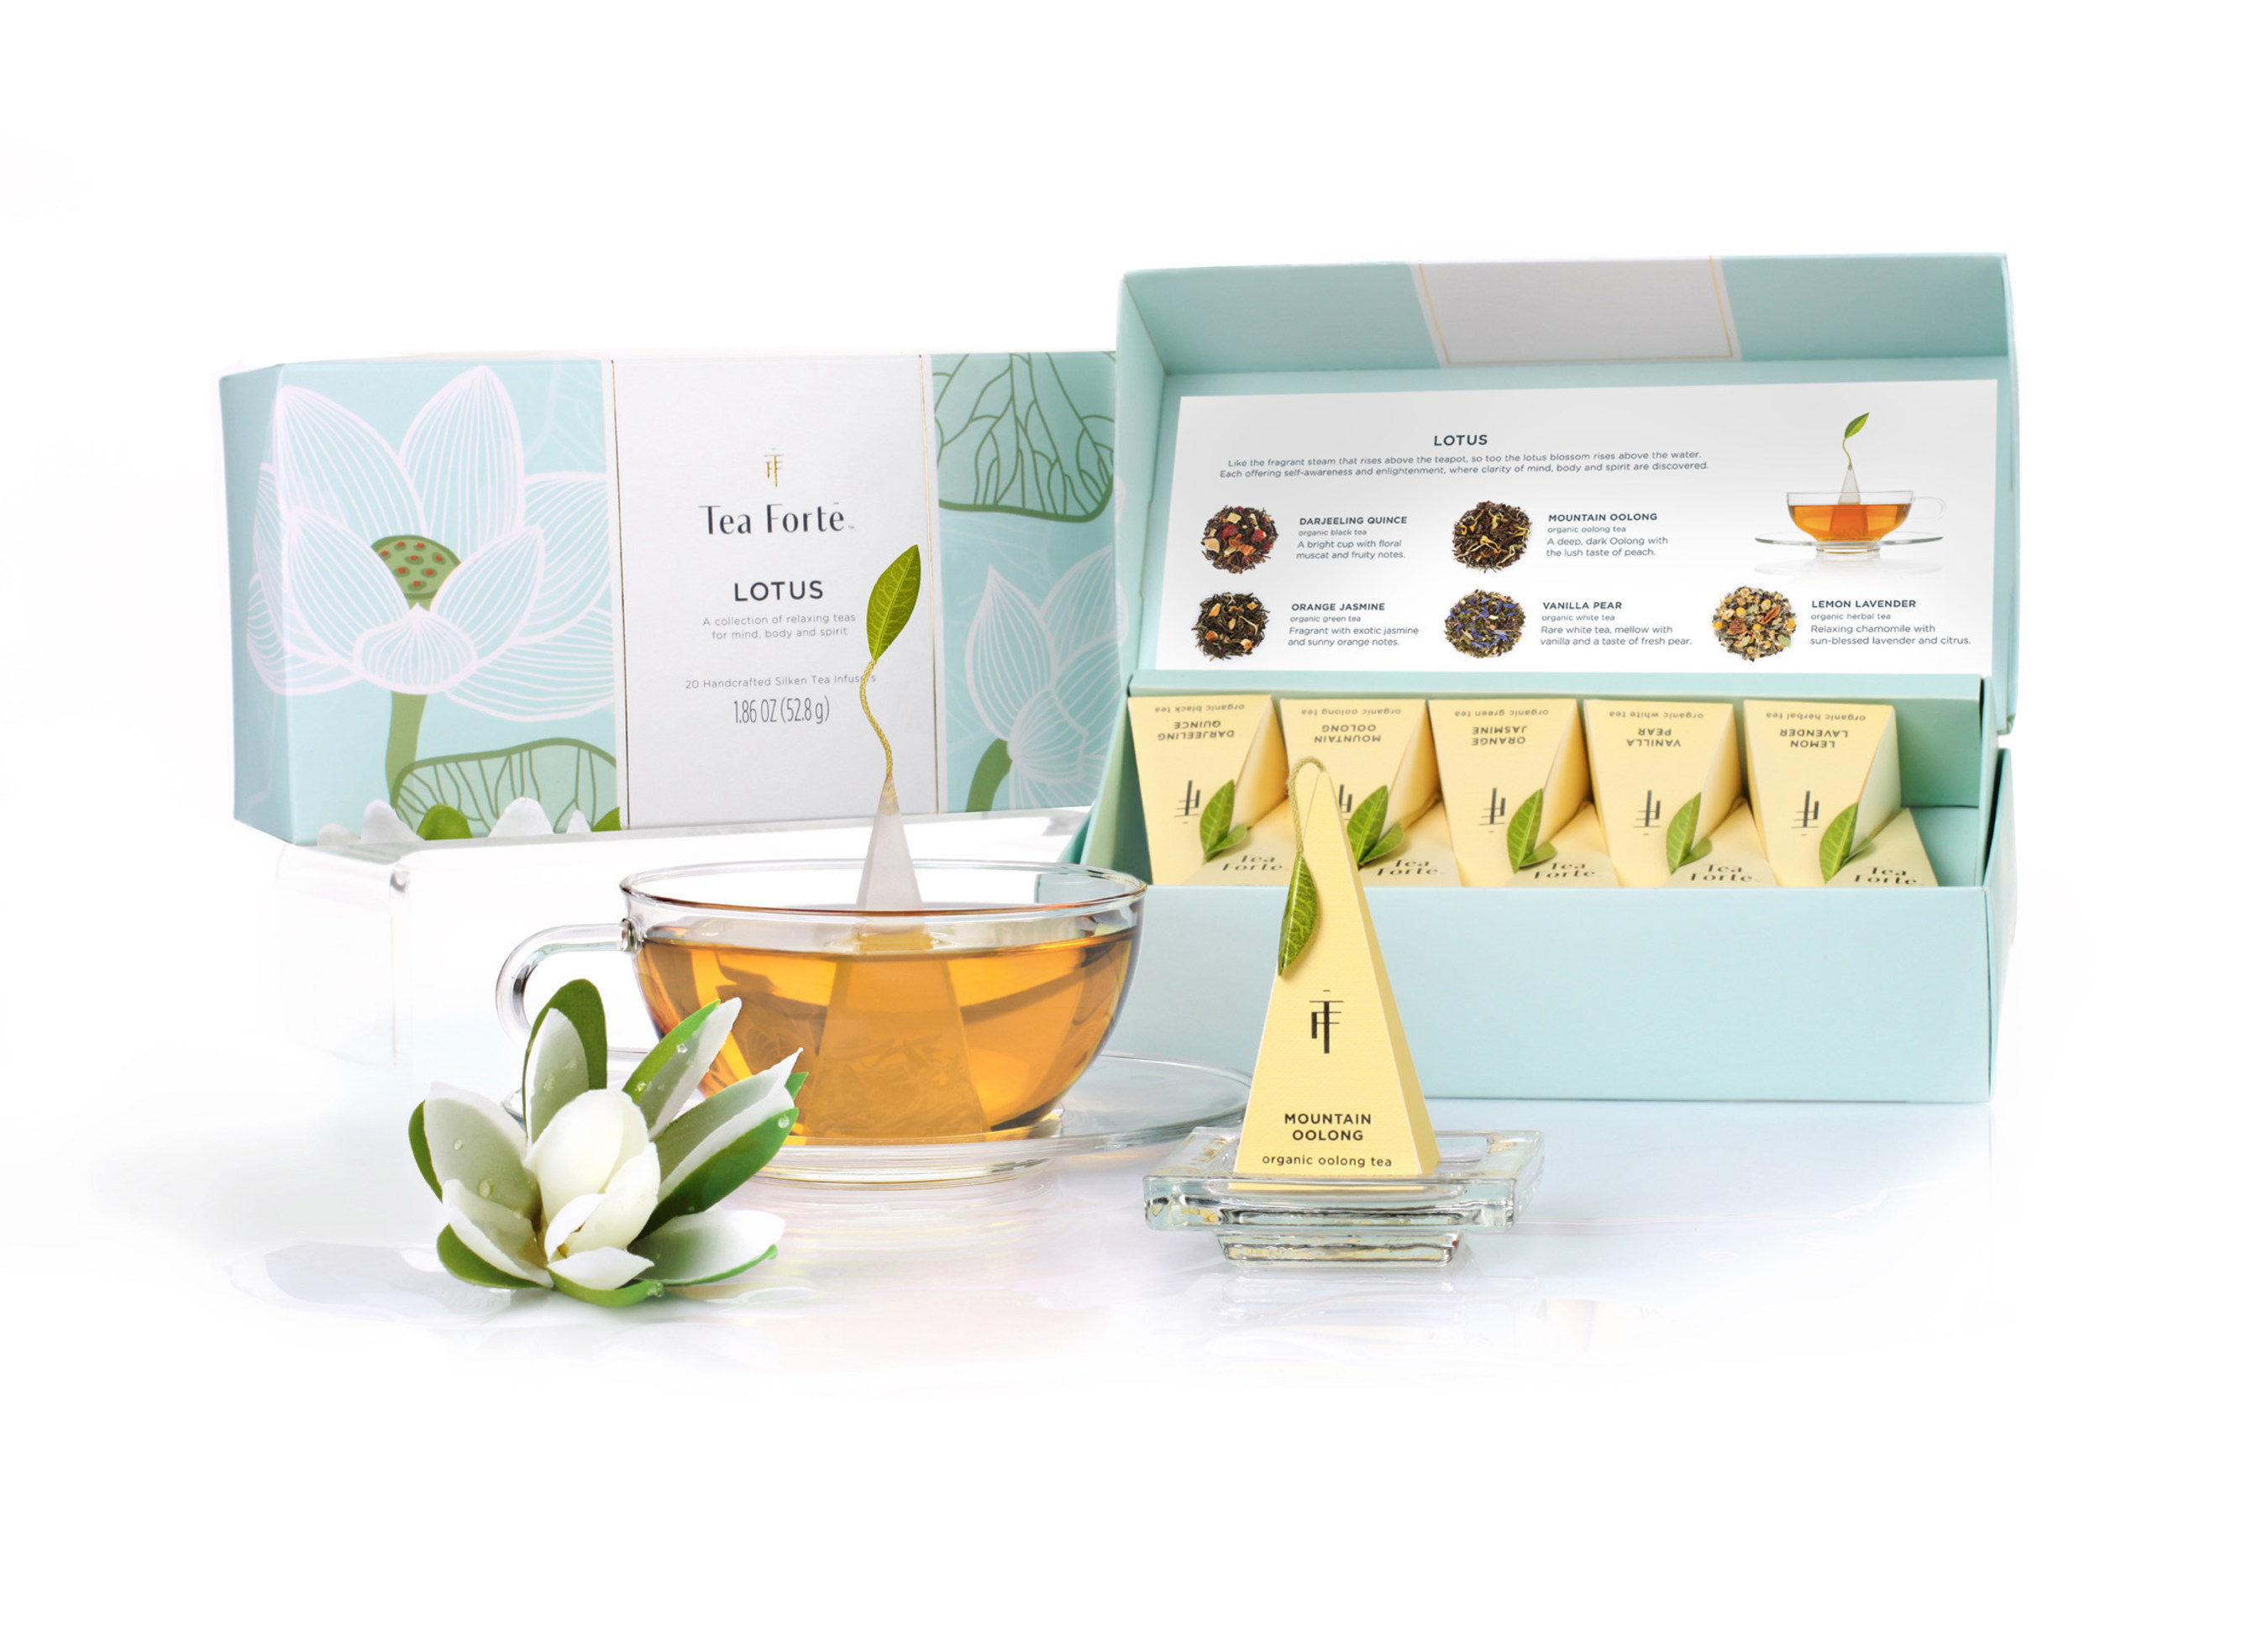 Introducing Tea Forte's  LOTUS - a curated collection of teas for mind, body & spirit.